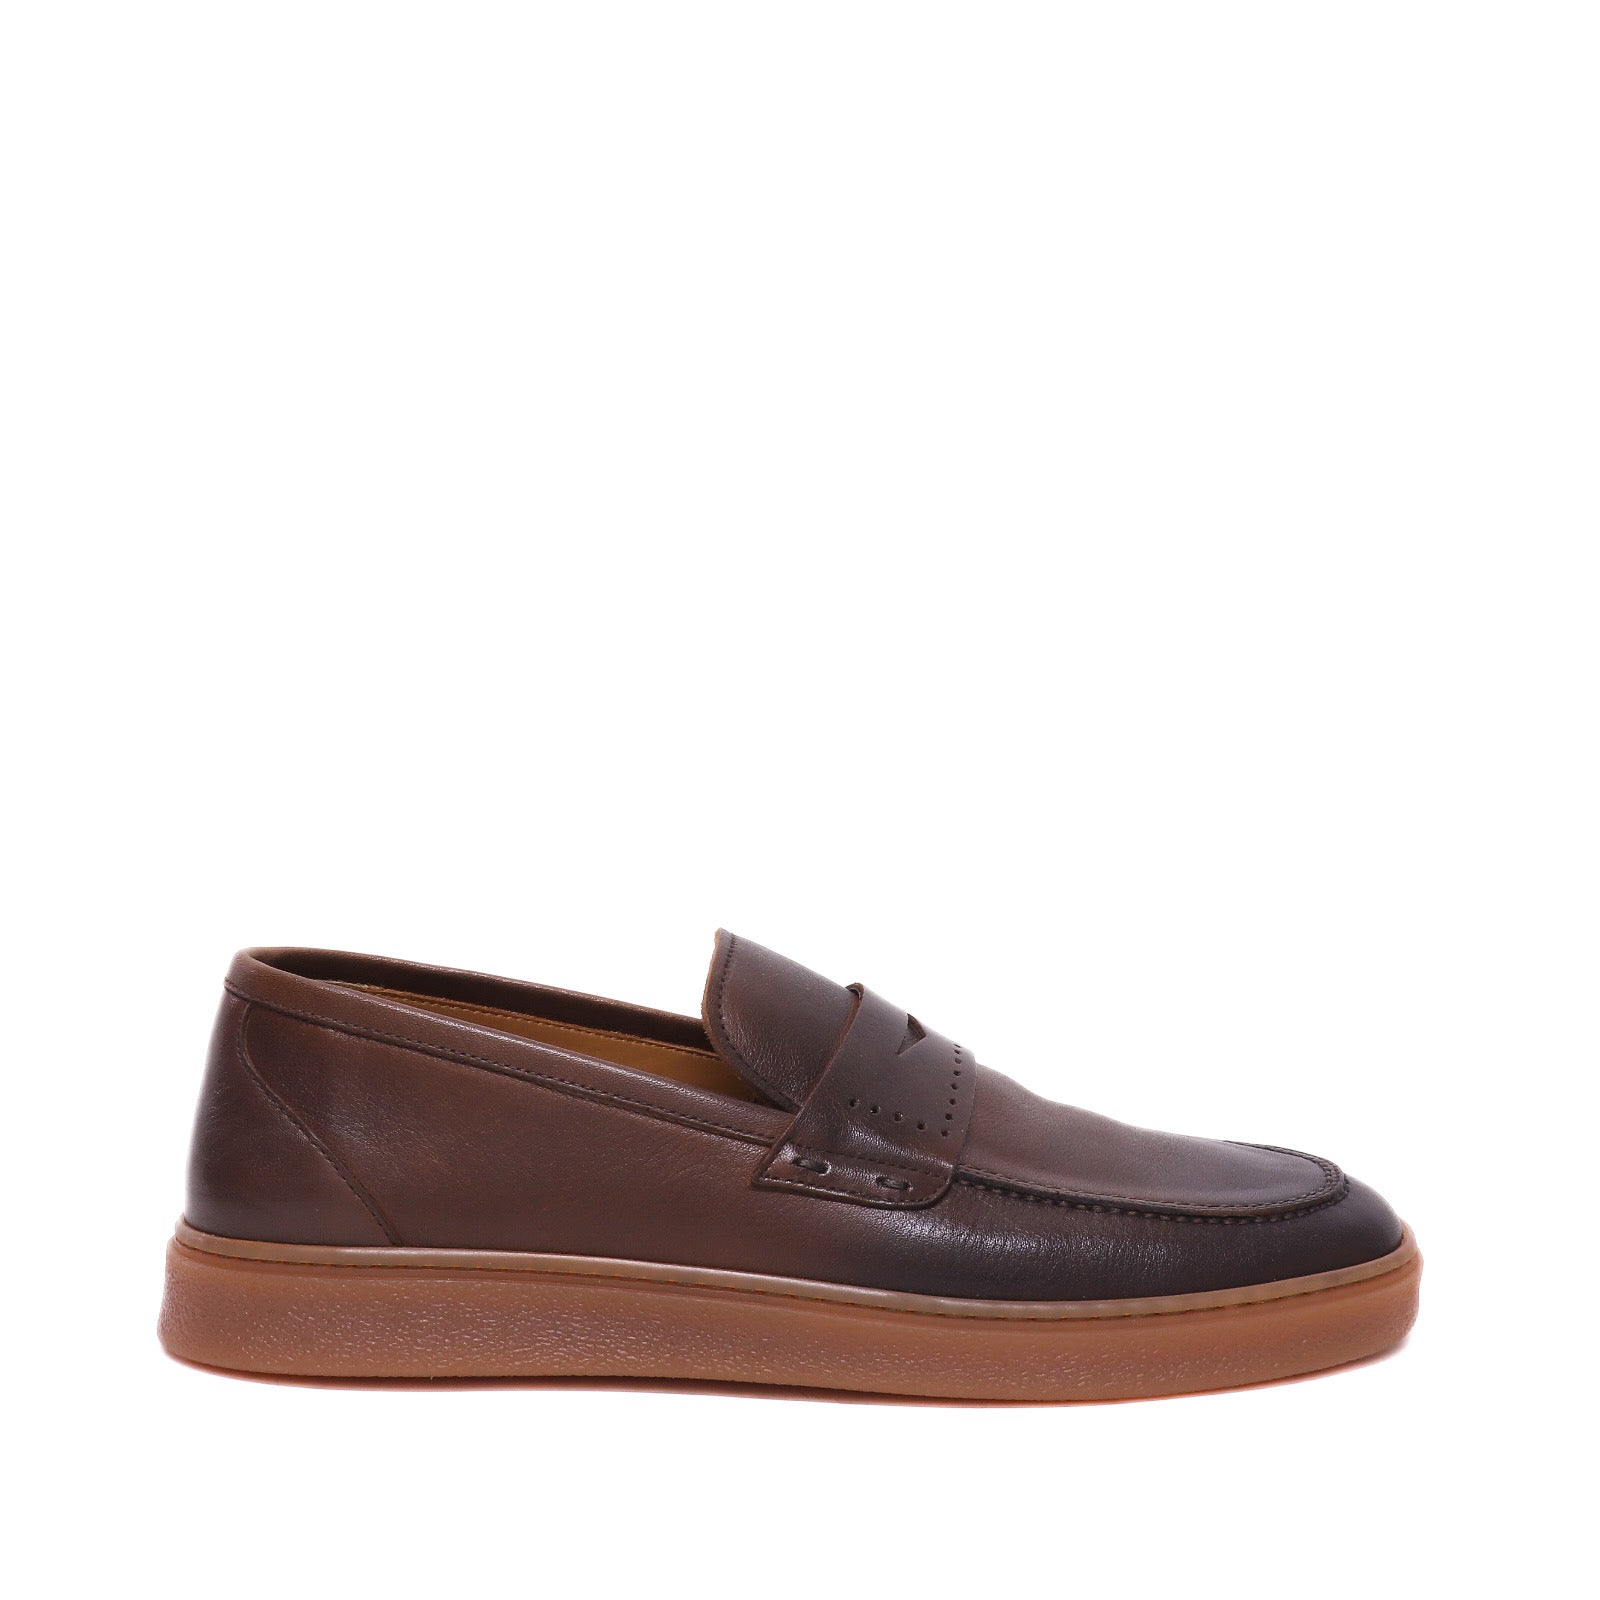 Rossi Dixan moccasin